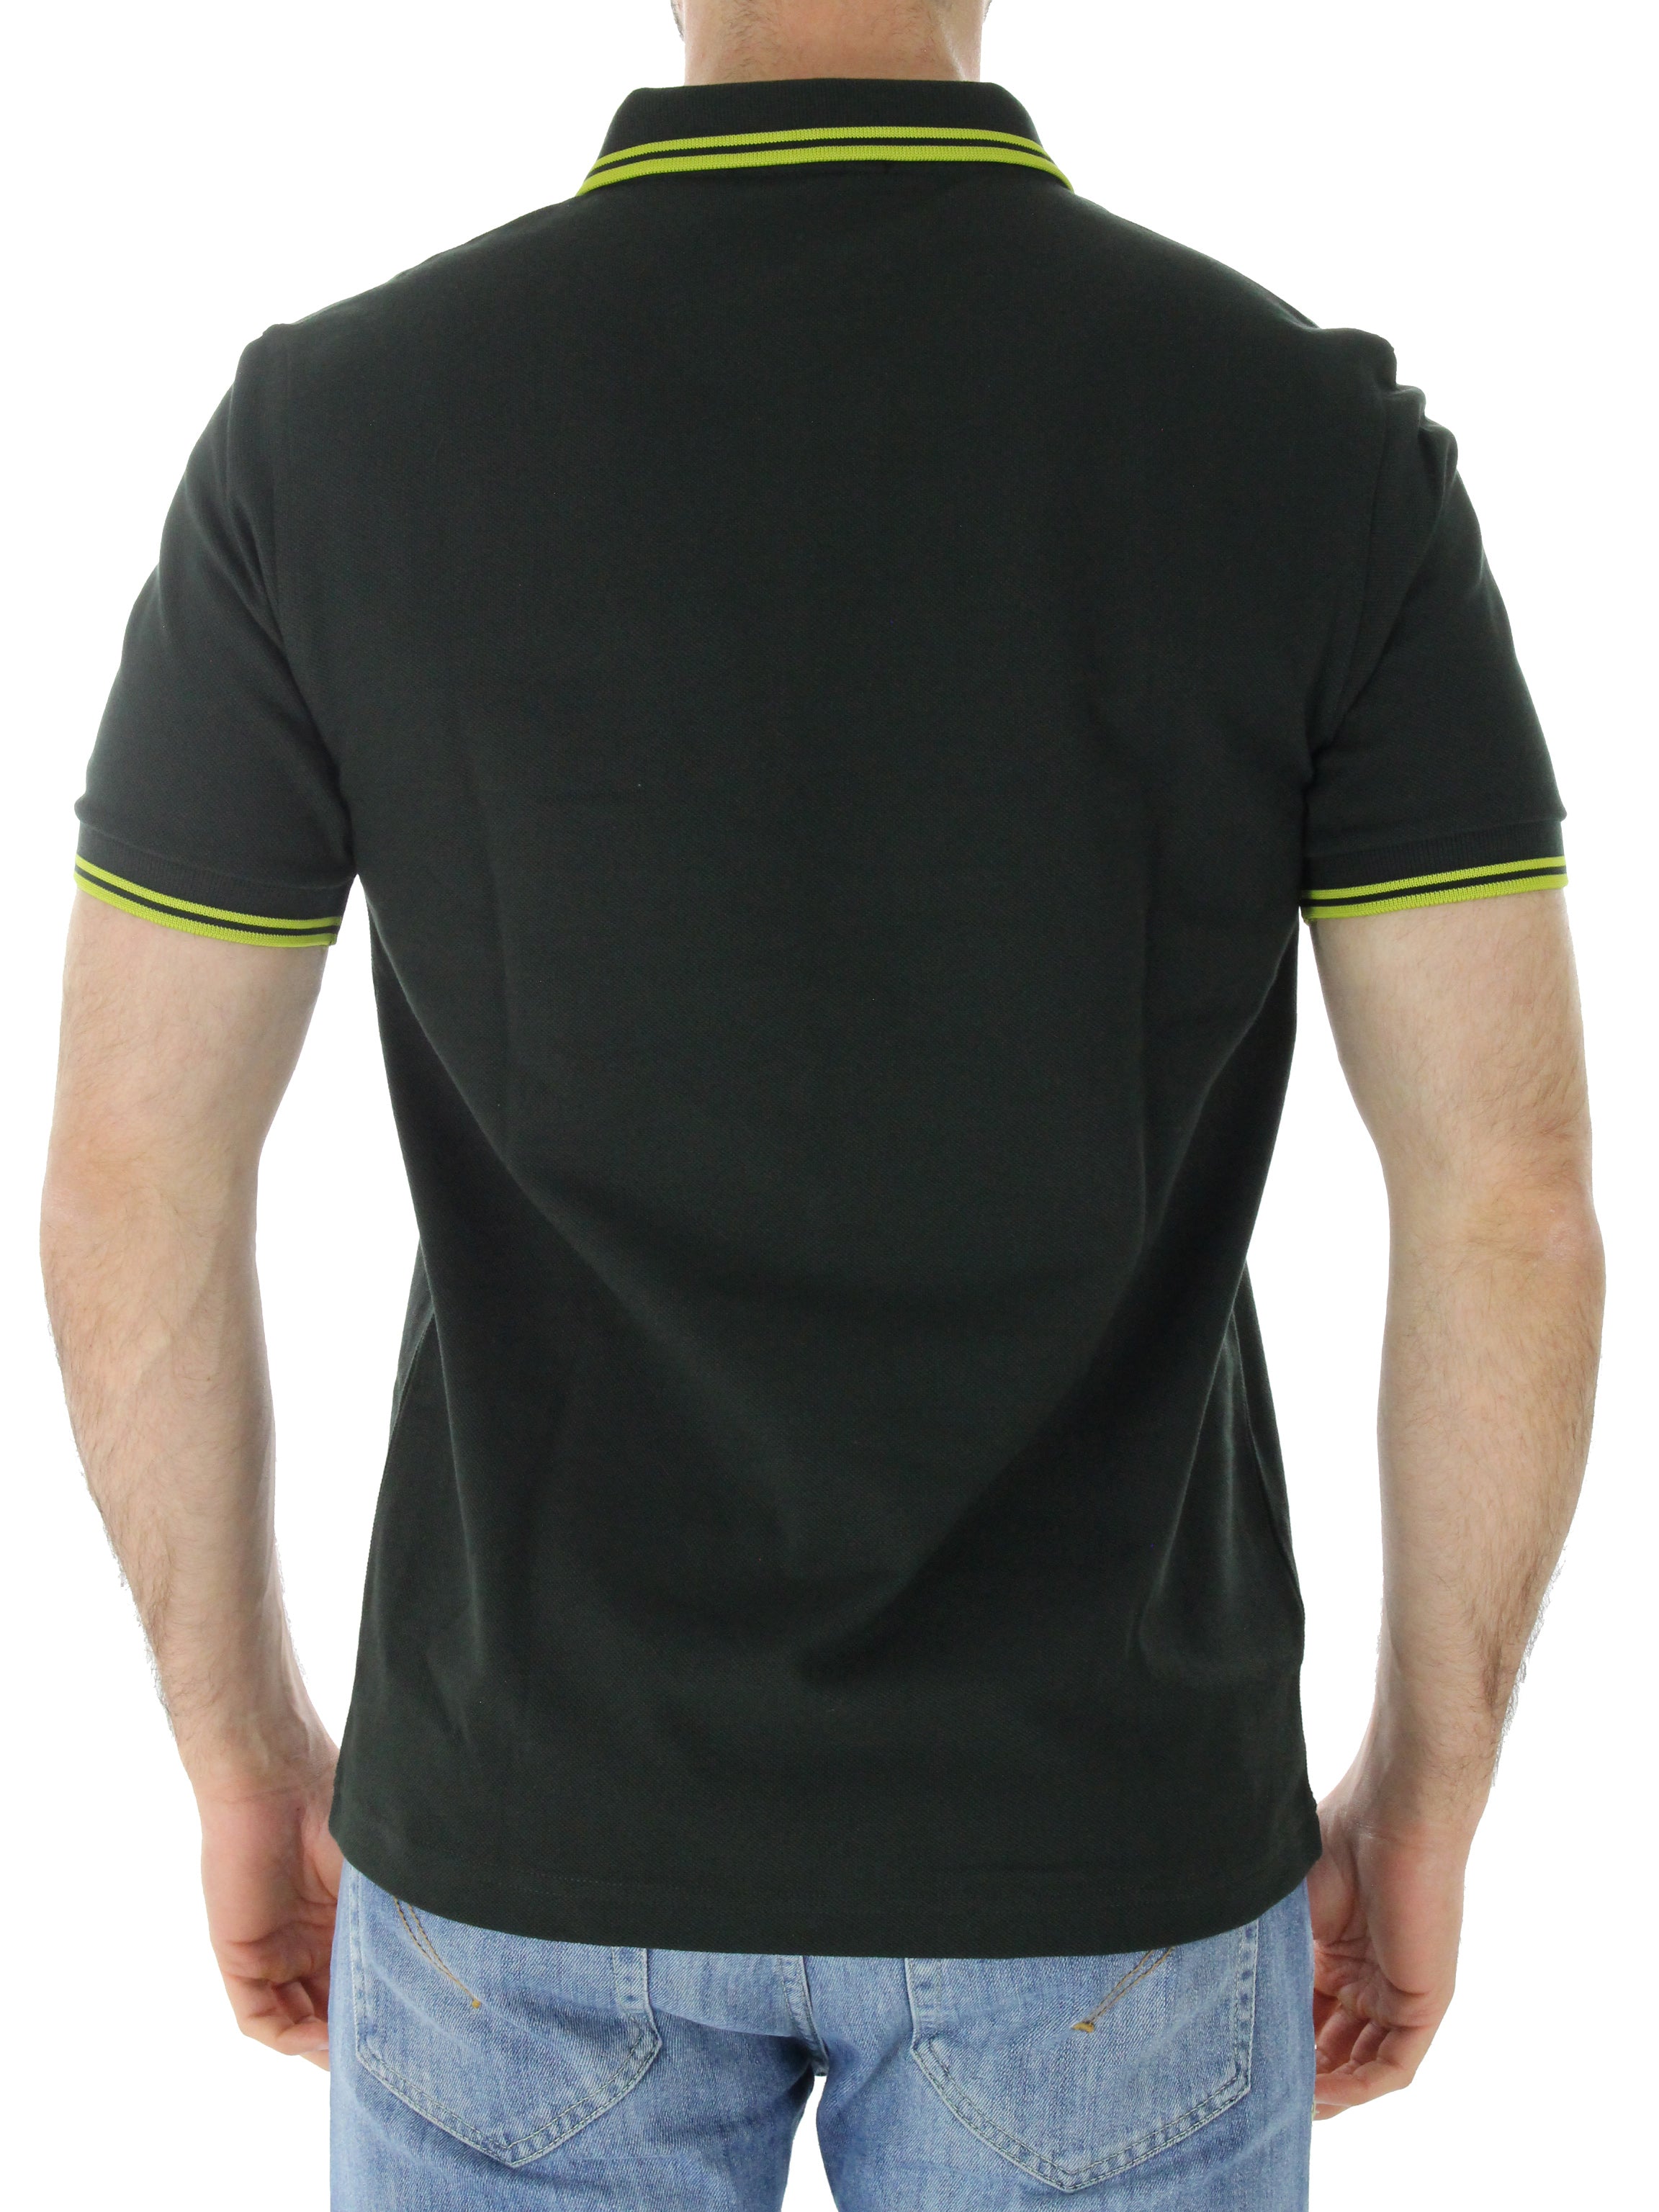 Fred perry polo righino verde